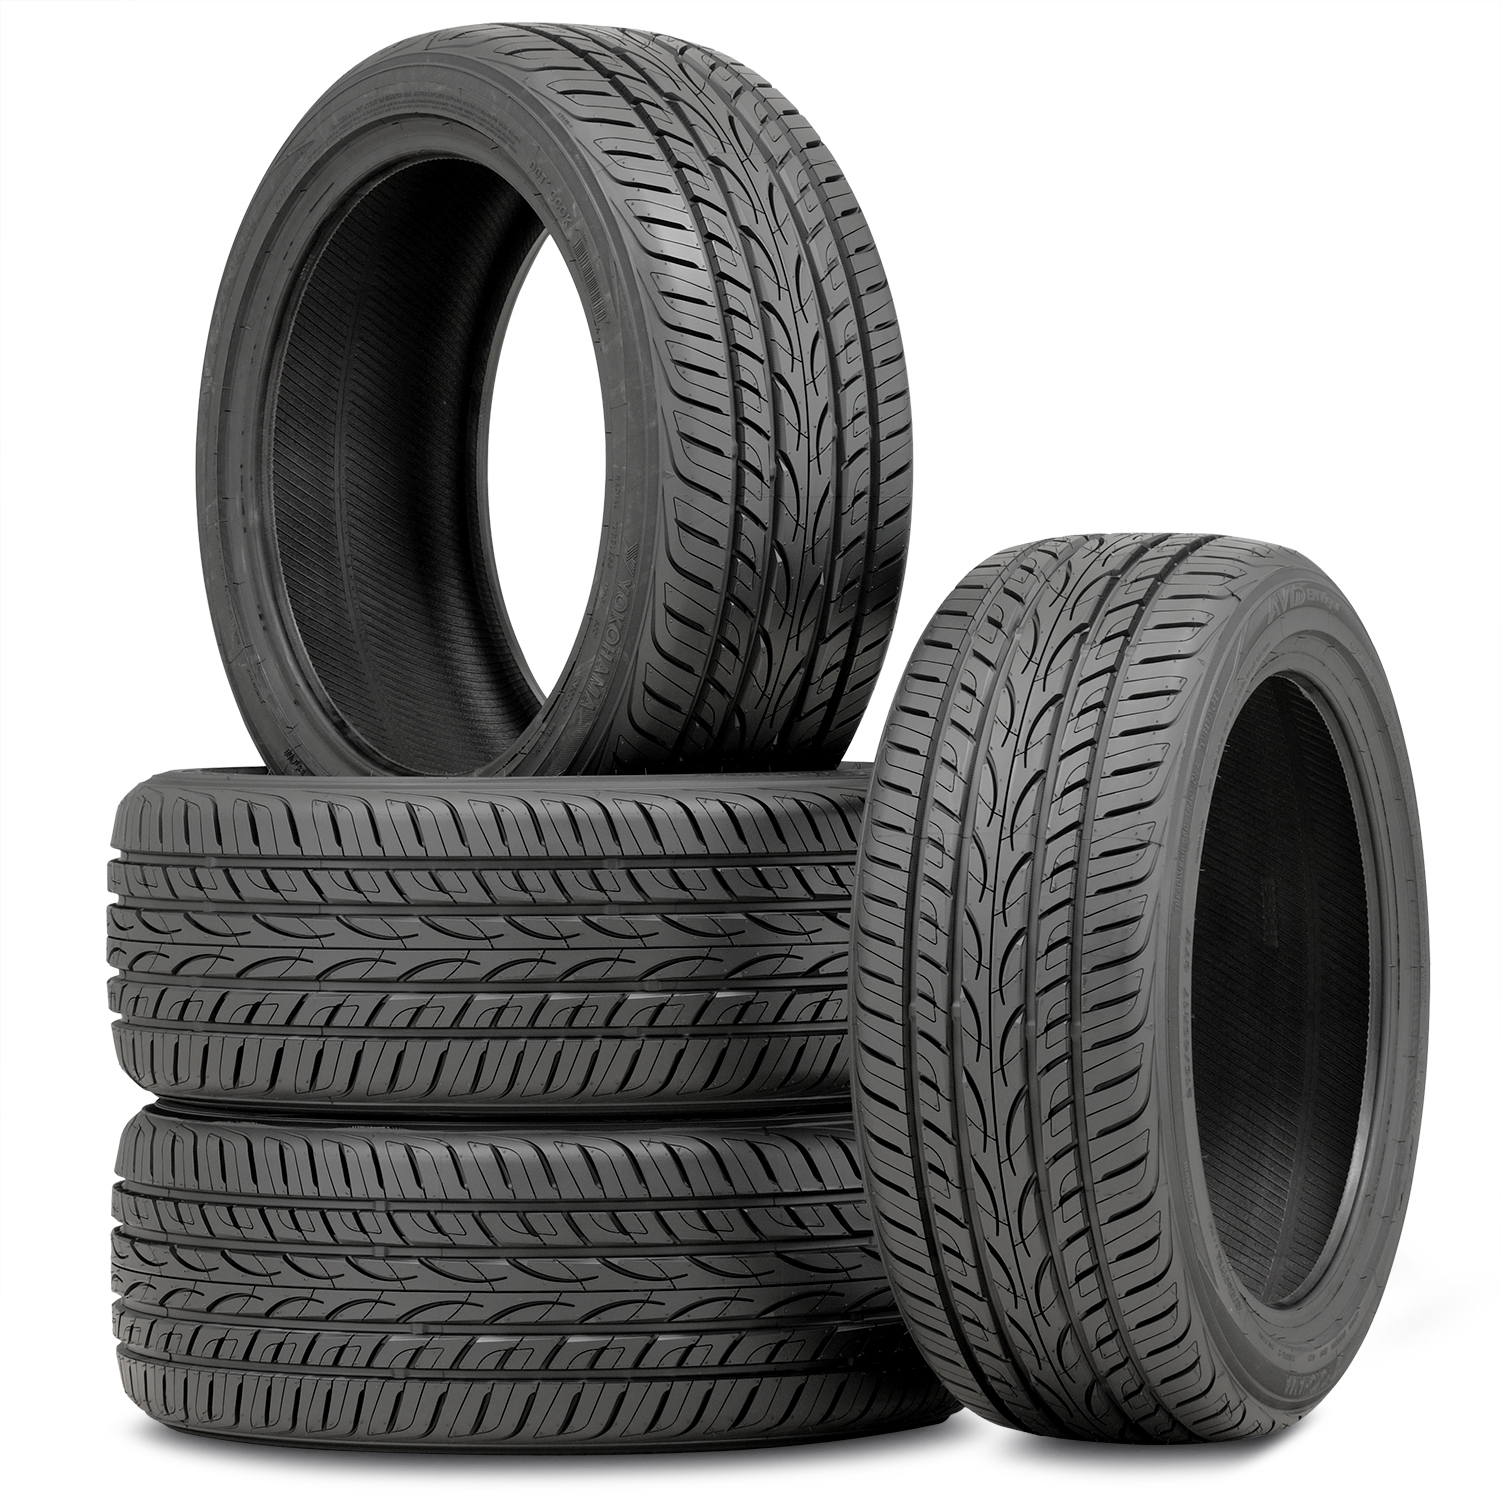 , How to properly store winter and summer tires